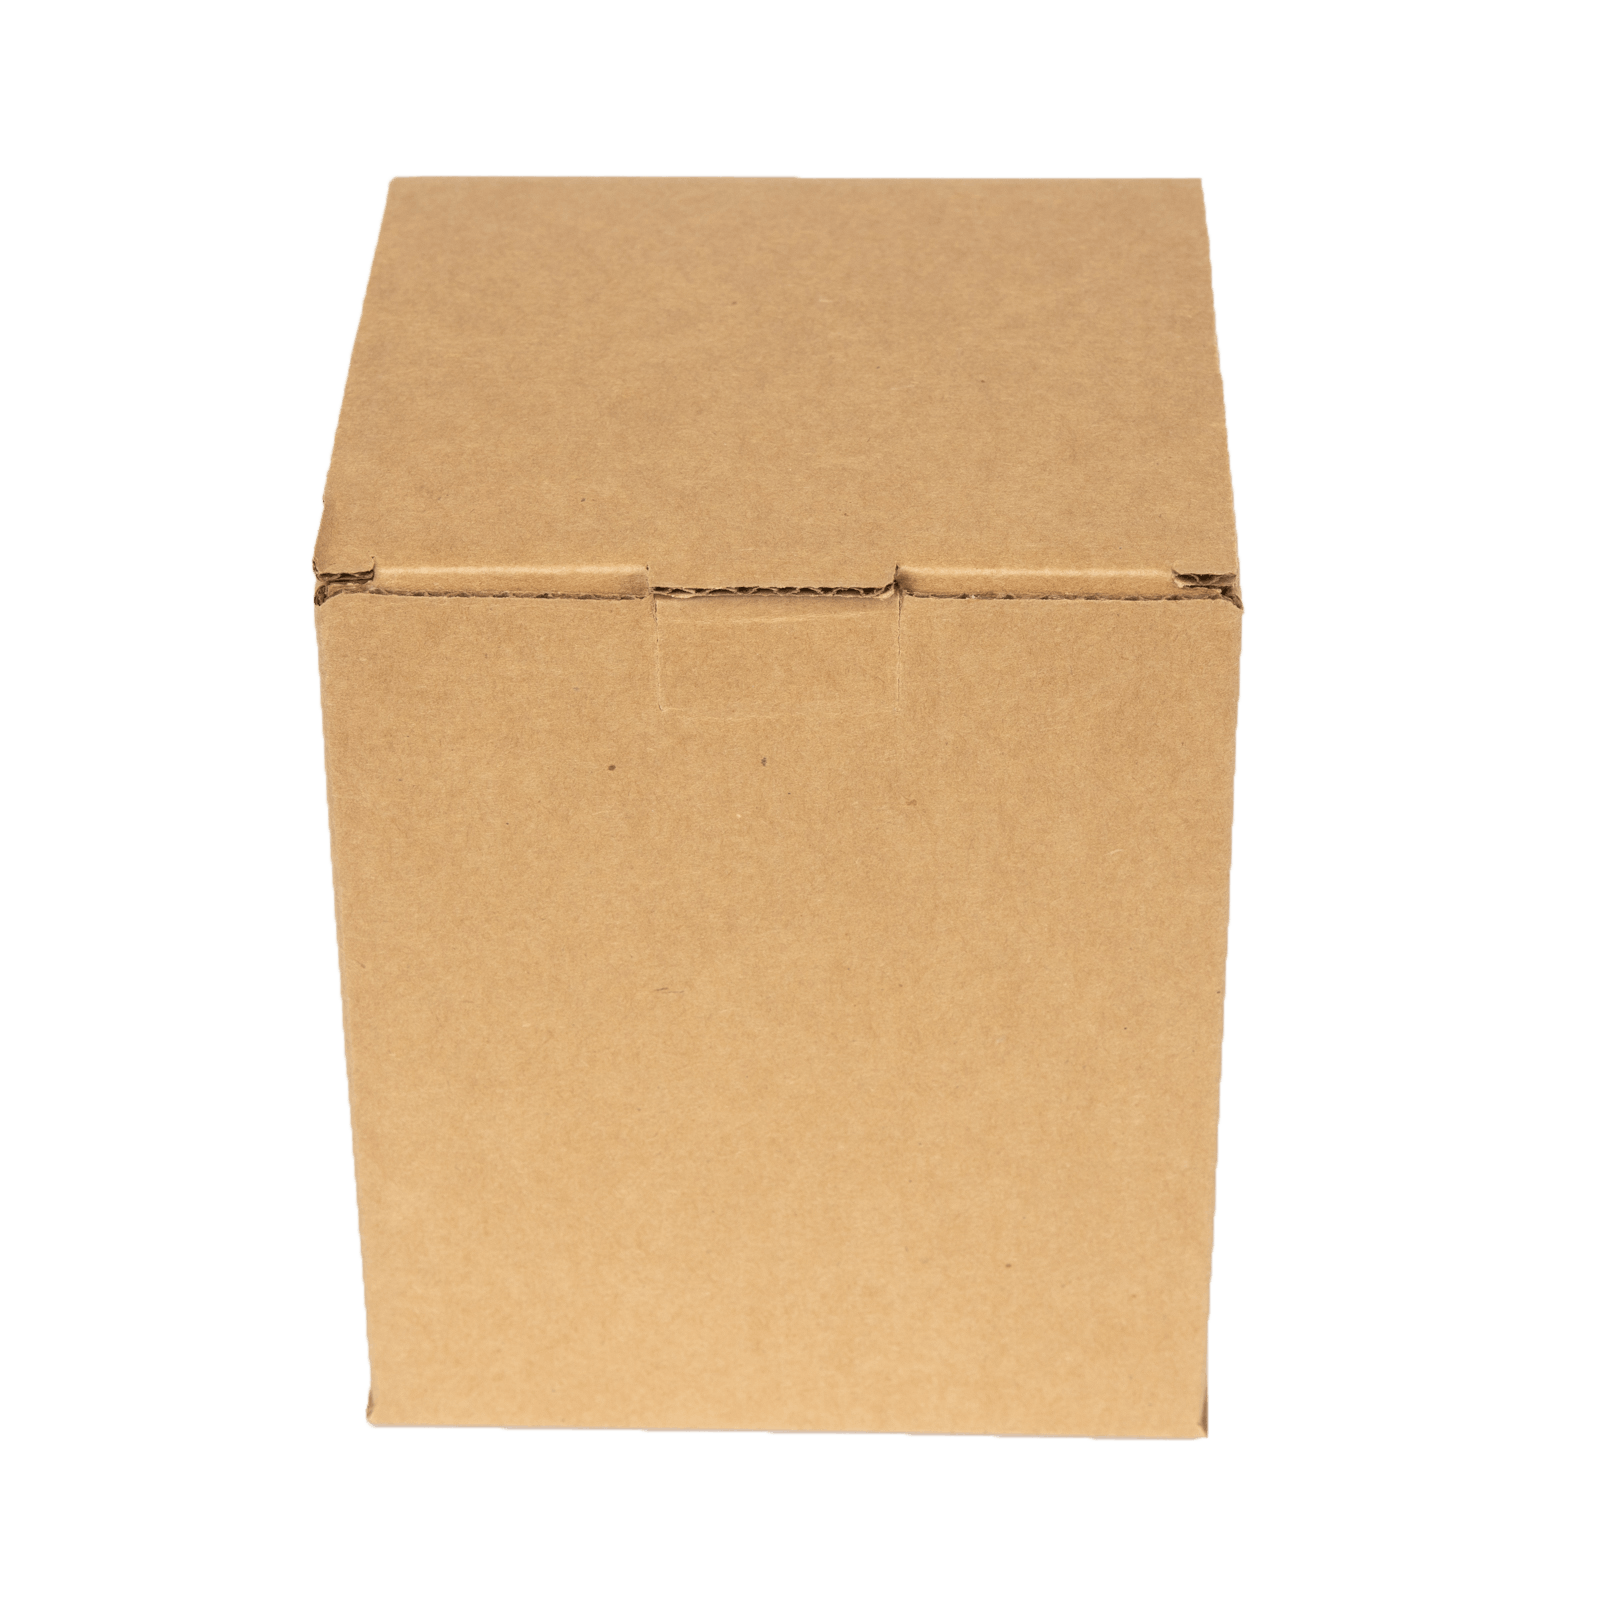 4 Pack Eco Friendly Beer Shipping Box